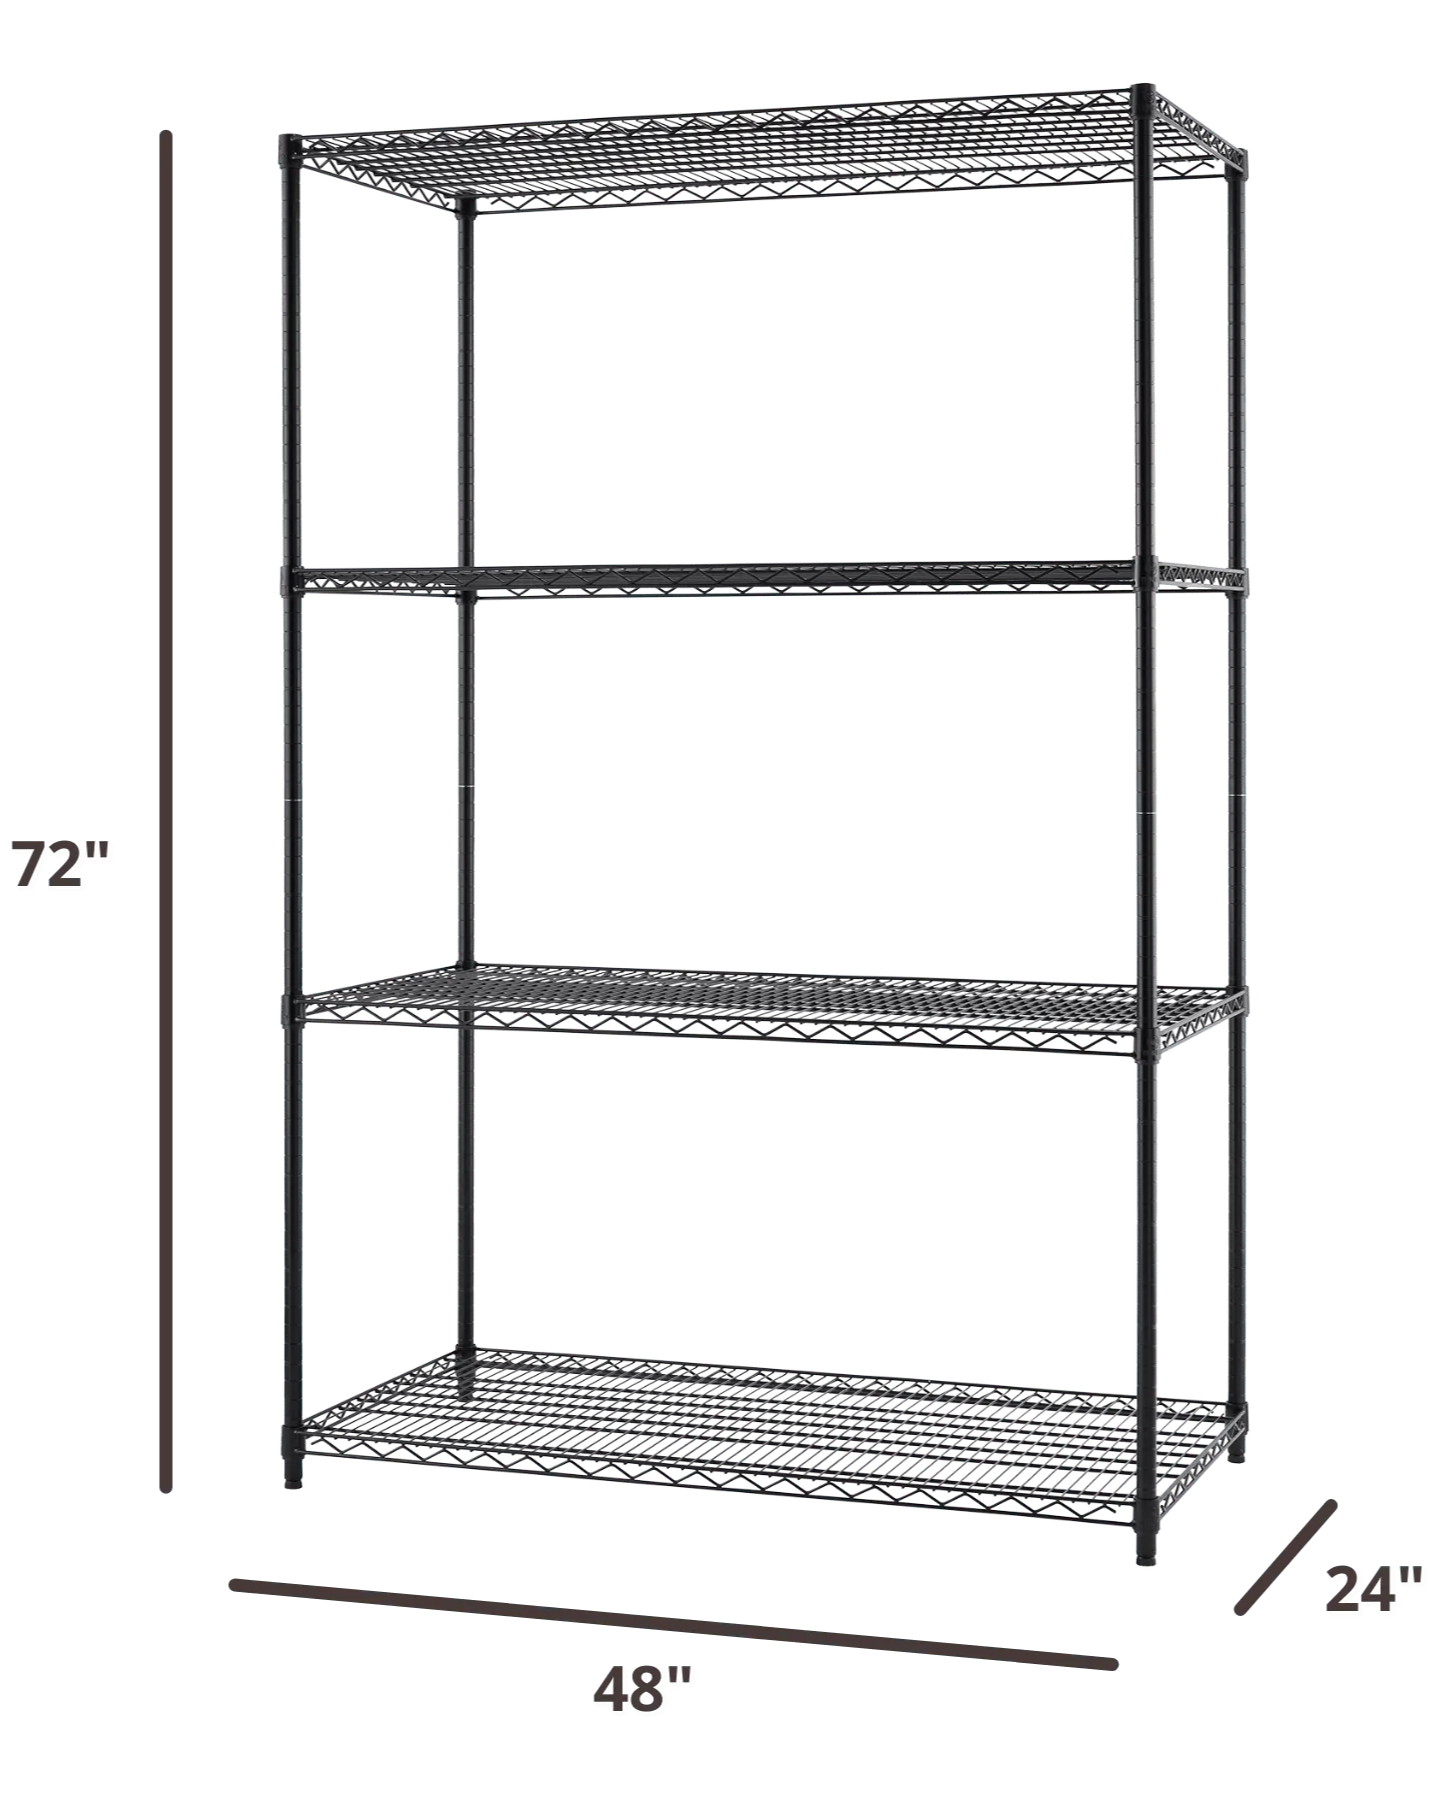 48 inches wide by 24 inches deep black wire shelving rack